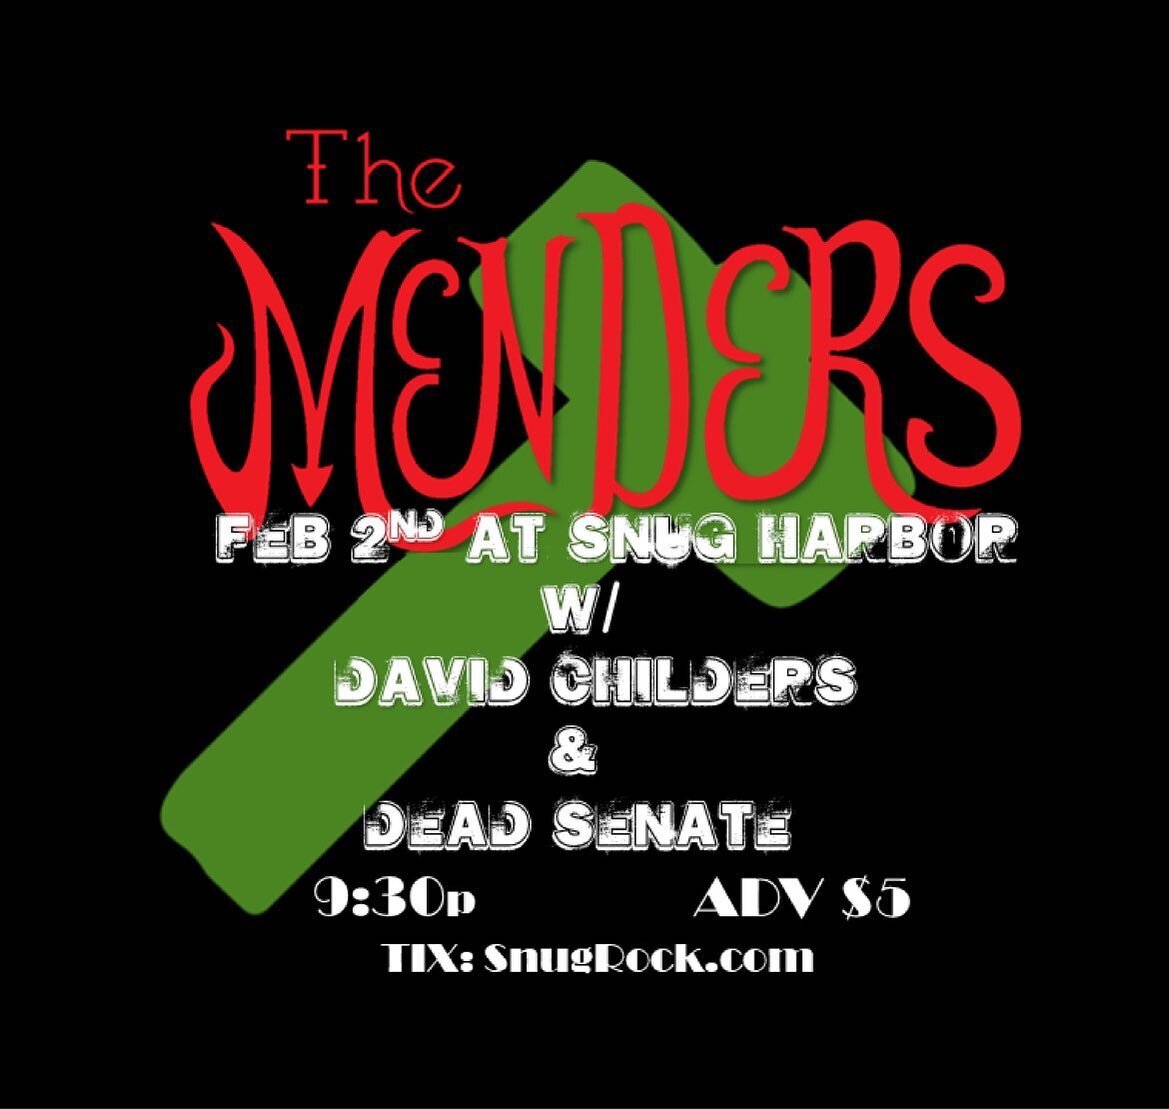 Join us at Snug Harbor (@snugharbornc) Wednesday night for the beginning of our month long residency! We&rsquo;ll be starting off the month with some Menders classics!
W/ 
@davidchildersnc 
&amp;
@deadsenate 

Party starts at 9:30. Come for some hump